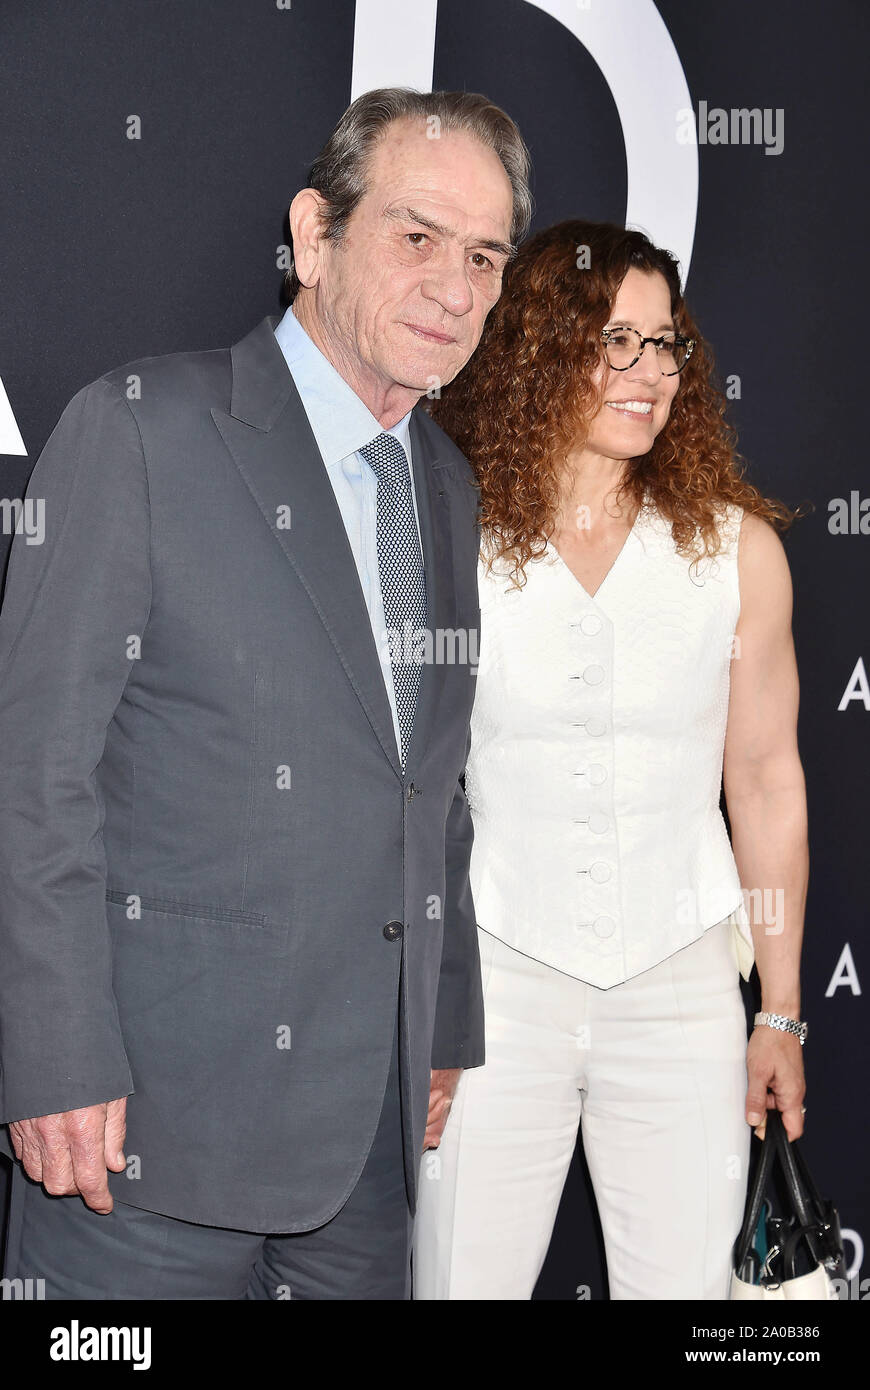 HOLLYWOOD, CA - SEPTEMBER 18: Tommy Lee Jones and Dawn Laurel-Jones attend the premiere of 20th Century Fox's 'Ad Astra' at The Cinerama Dome on September 18, 2019 in Los Angeles, California. Stock Photo